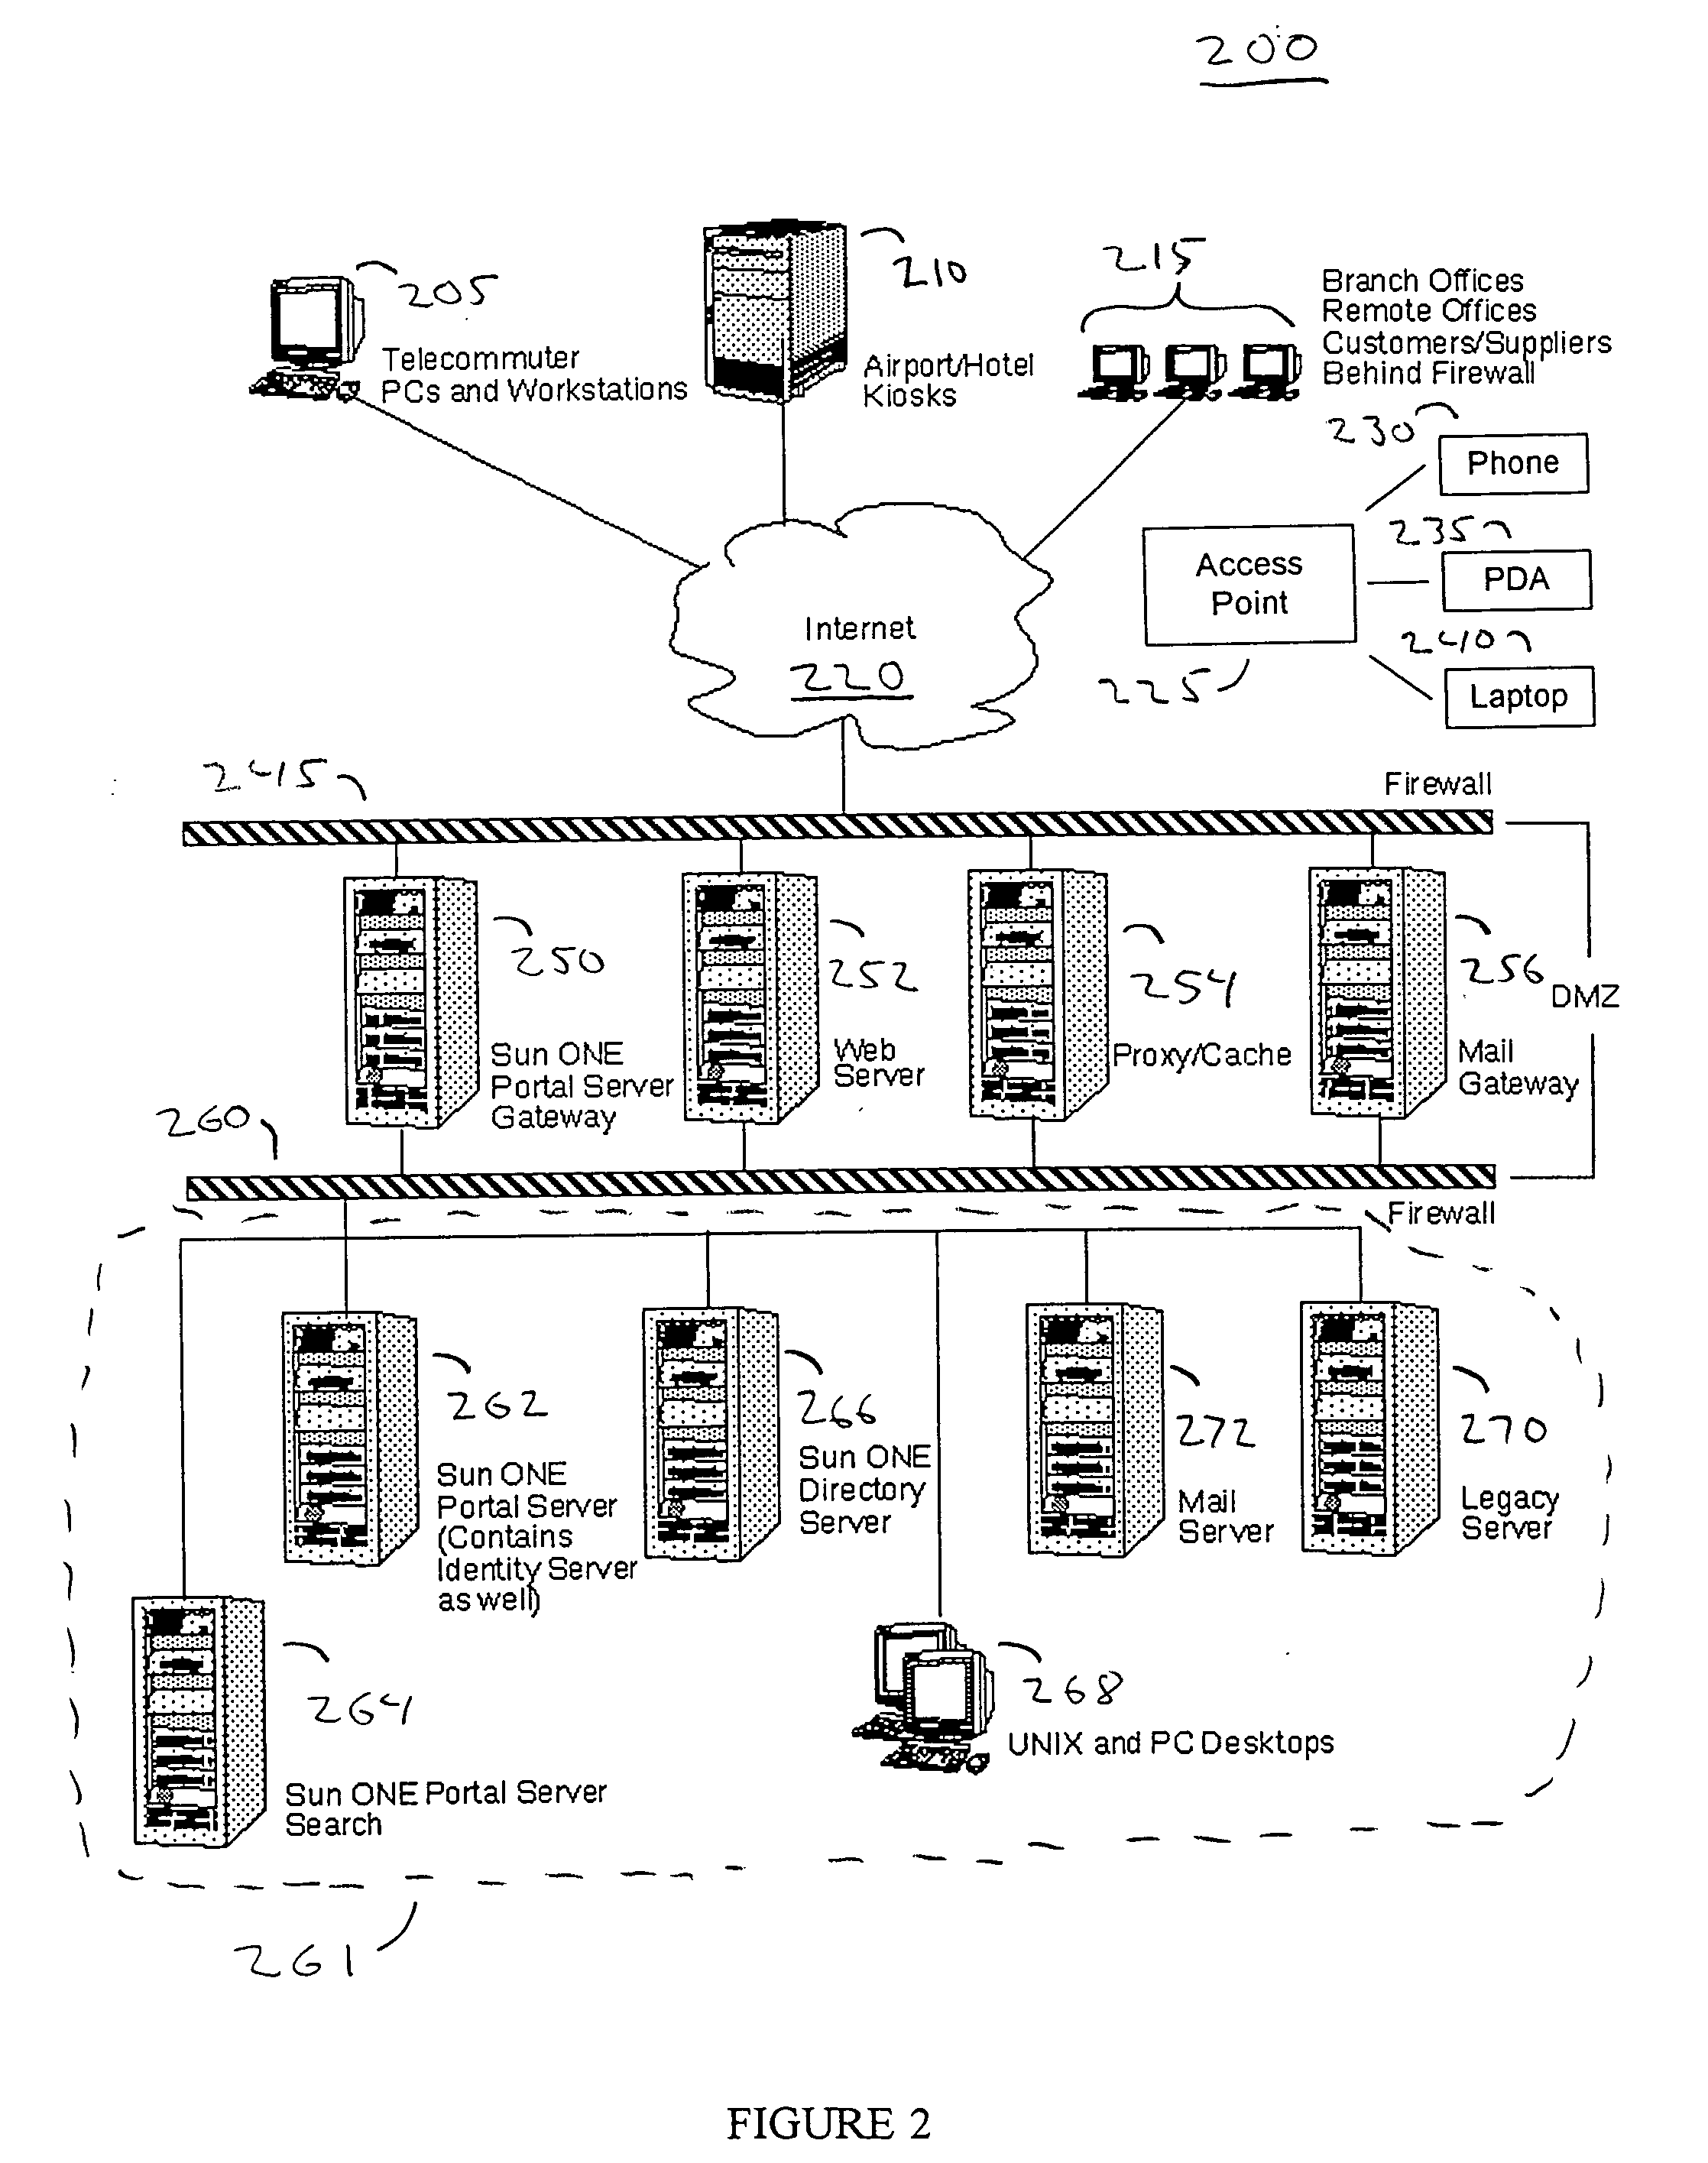 System and method for single-sign-on access to a resource via a portal server